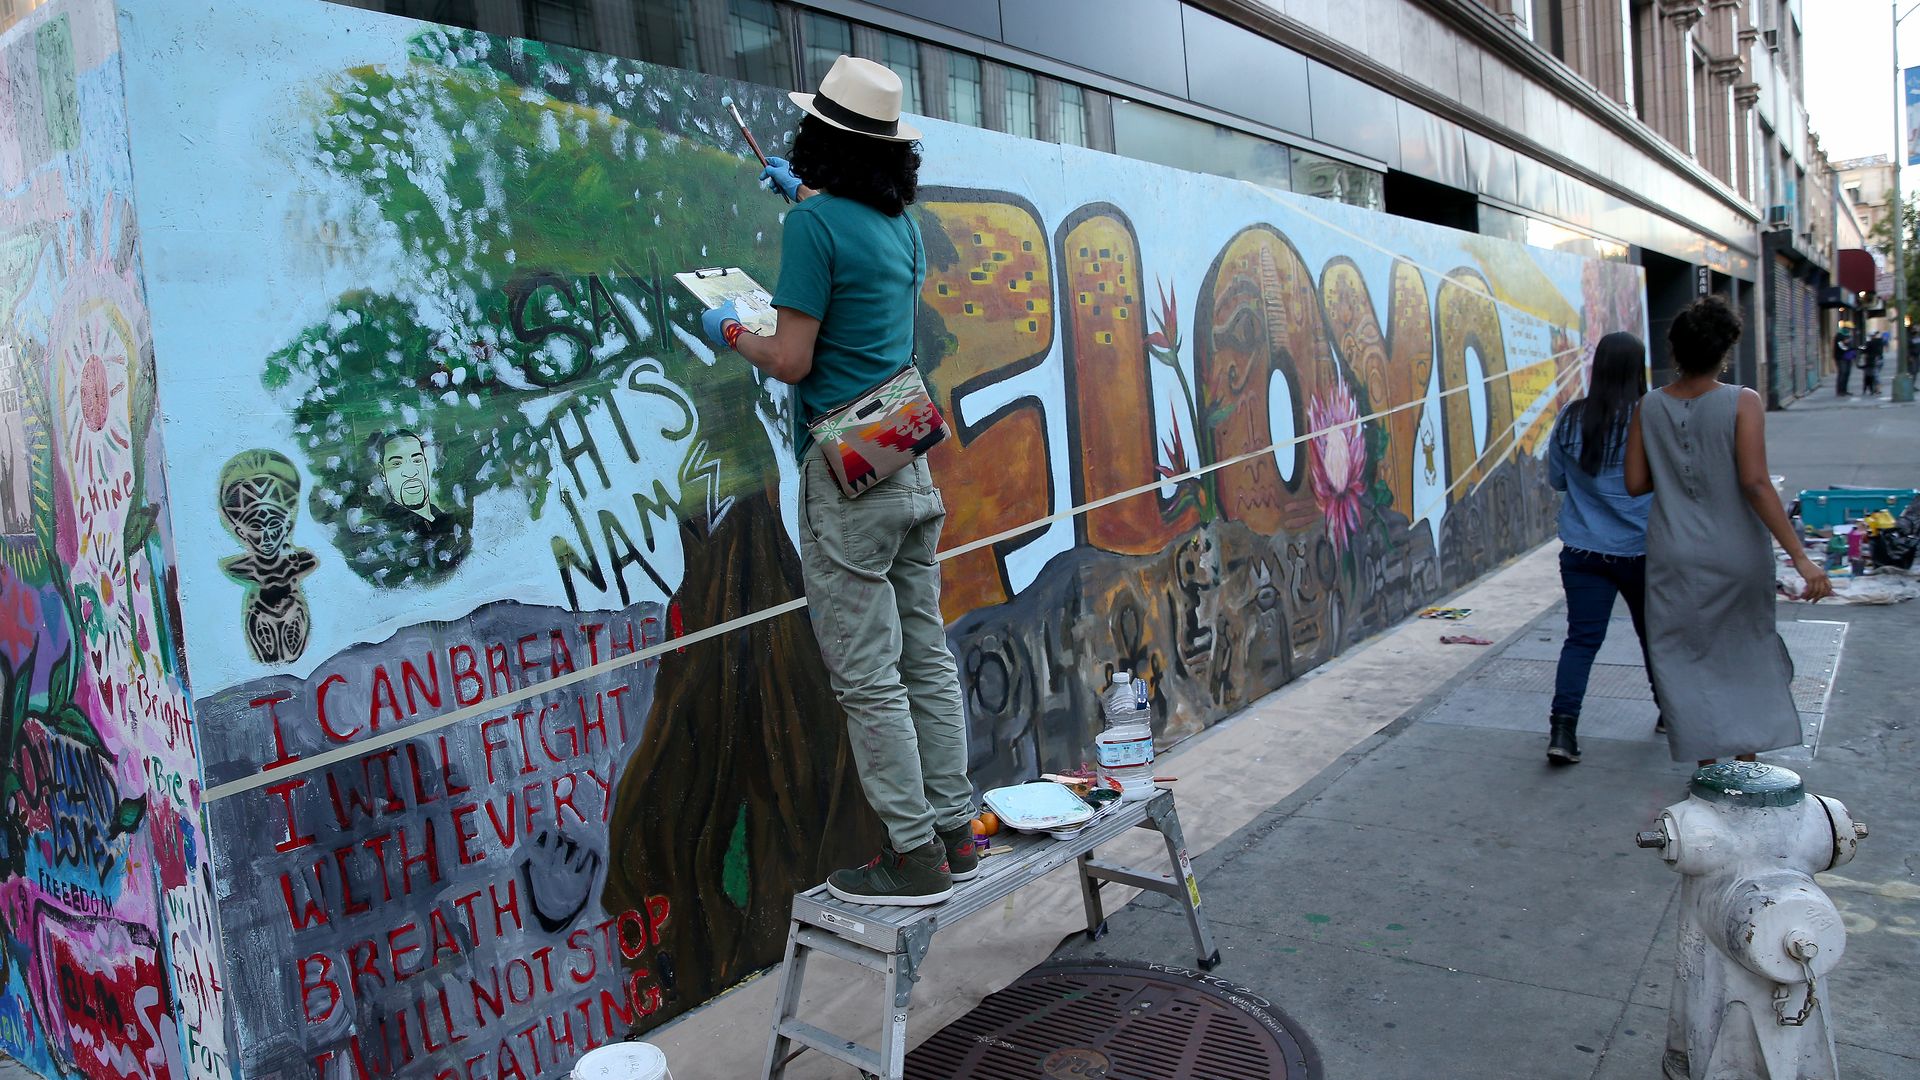  Octavio Hernandez, left, and other artists from the People's Conservatory, work on a mural for George Floyd on 15th Street in downtown Oakland